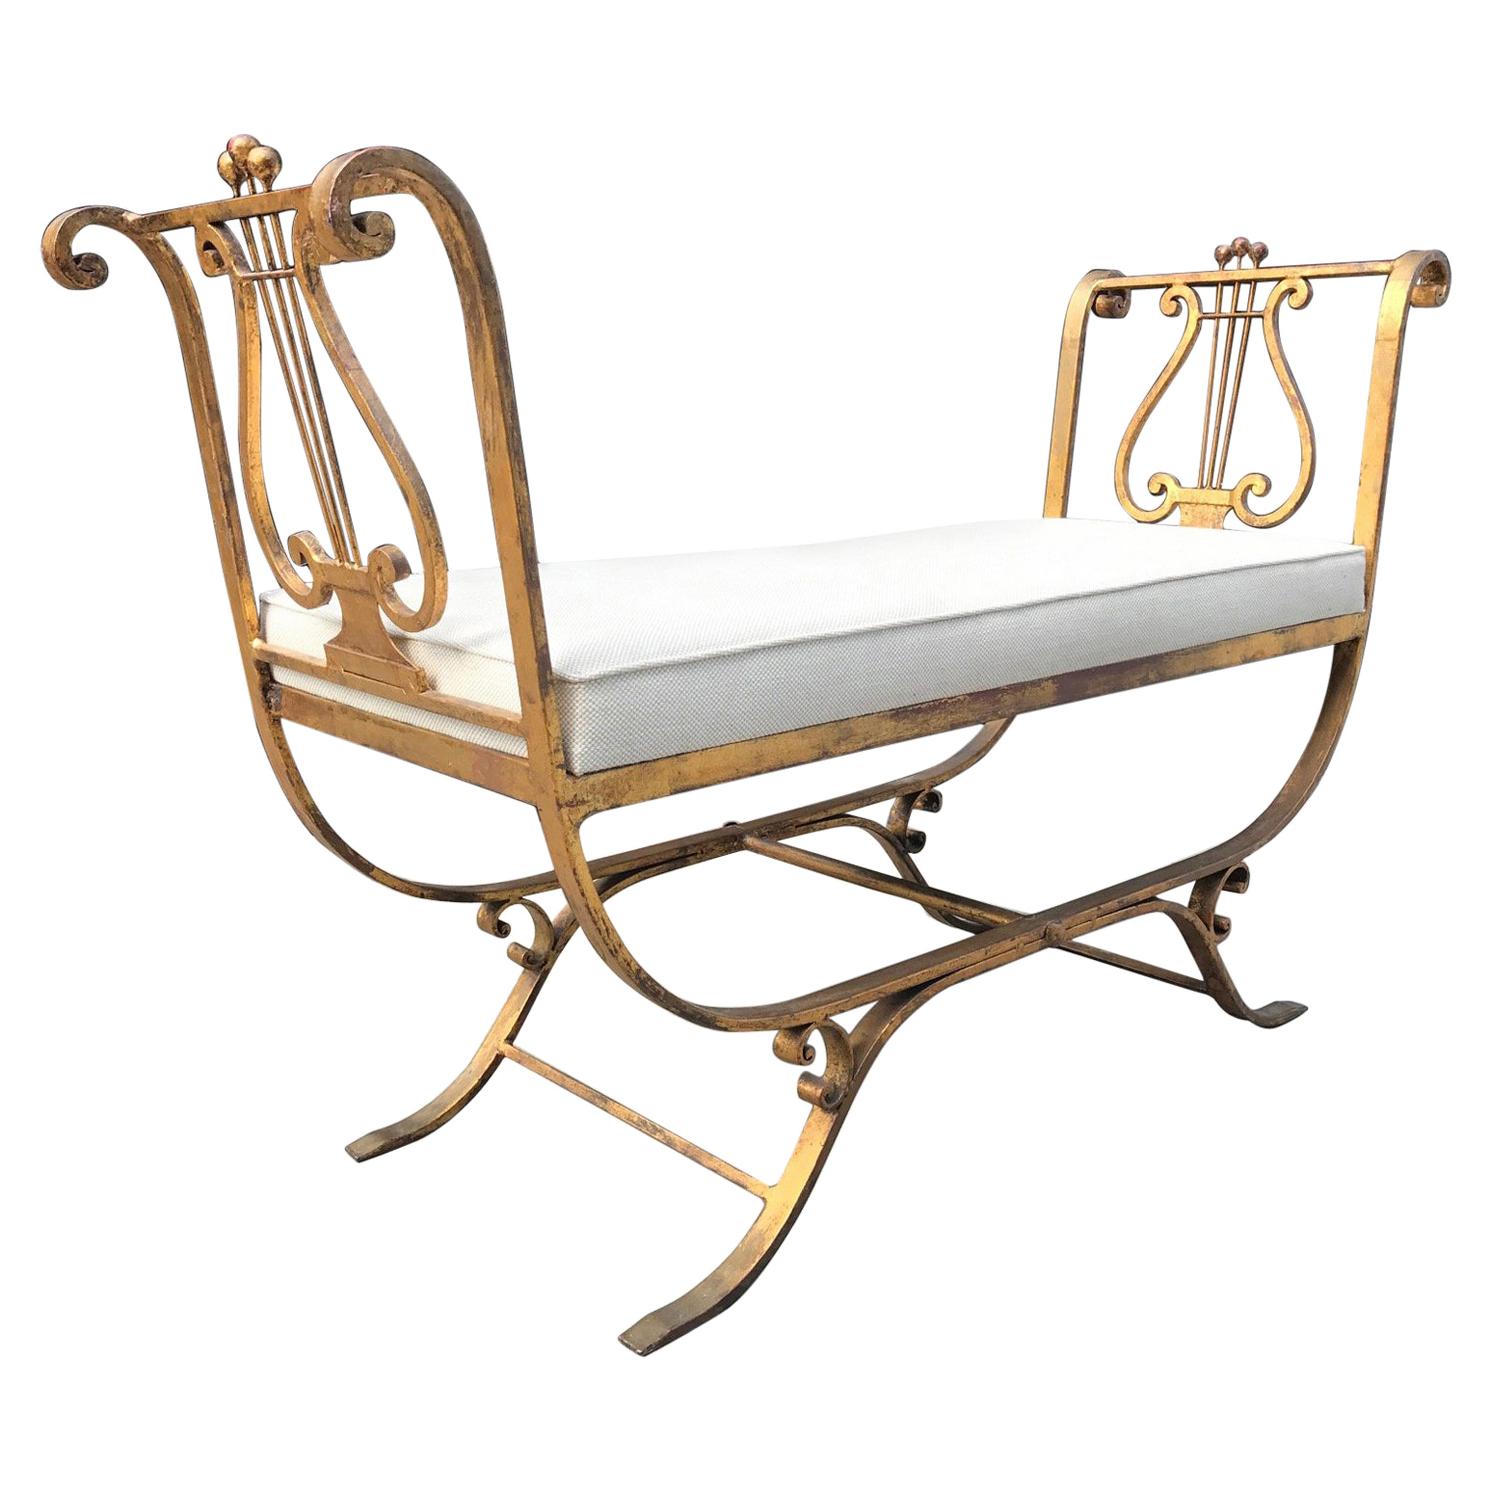 1950s Neoclassical Style Gold Gilt Iron Bench For Sale